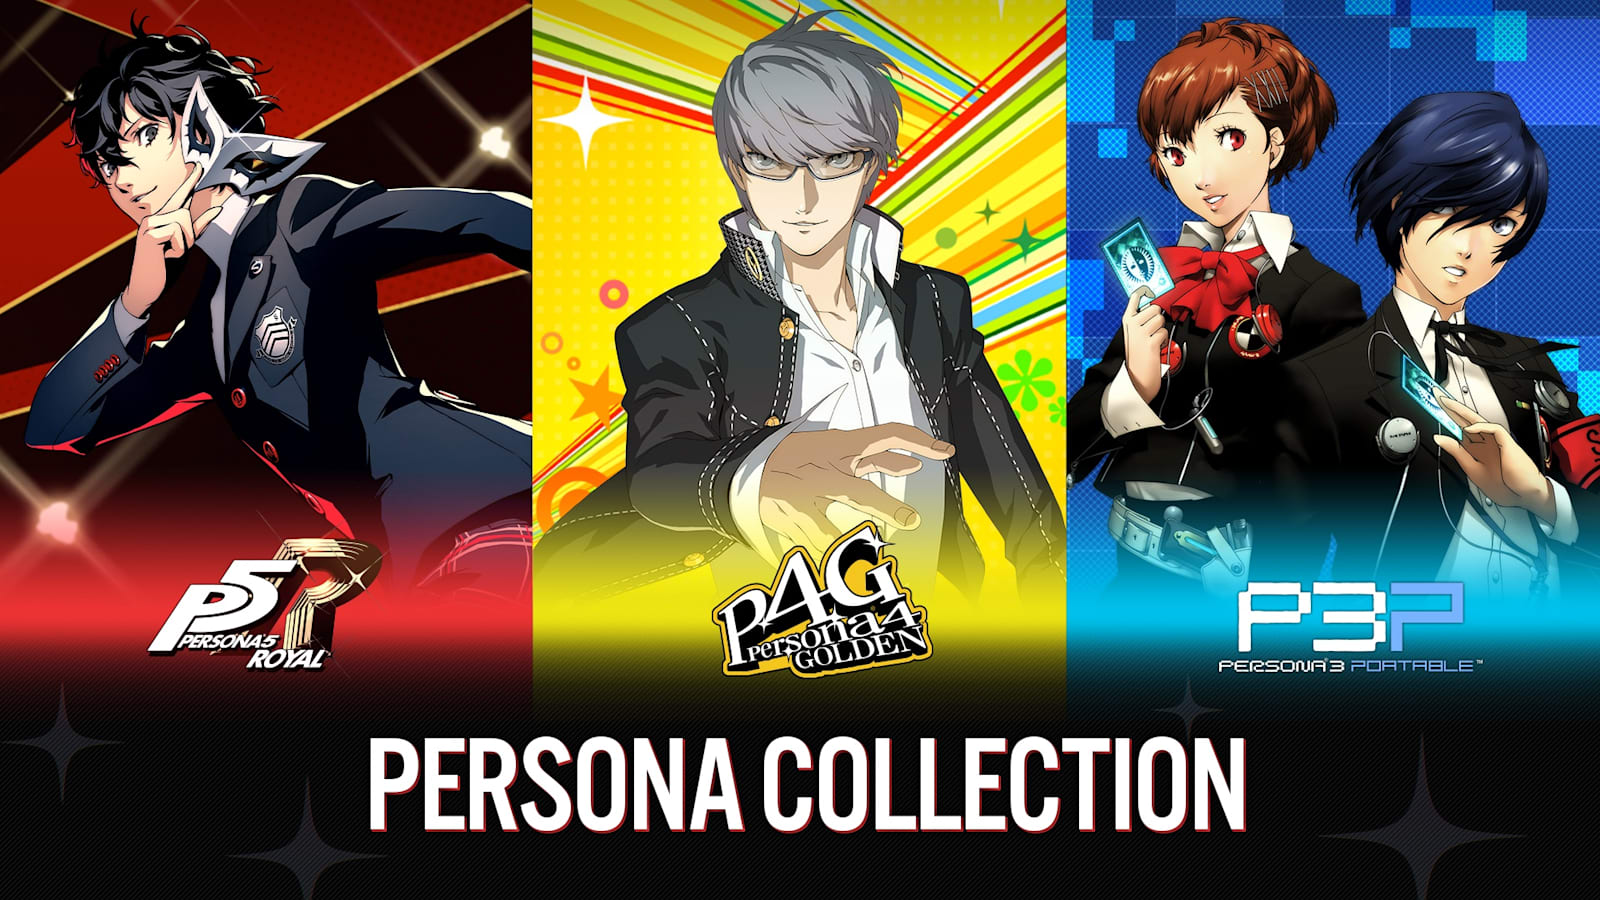 Persona Collection (Nintendo Switch Digital Download) $49.49 at Nintendo